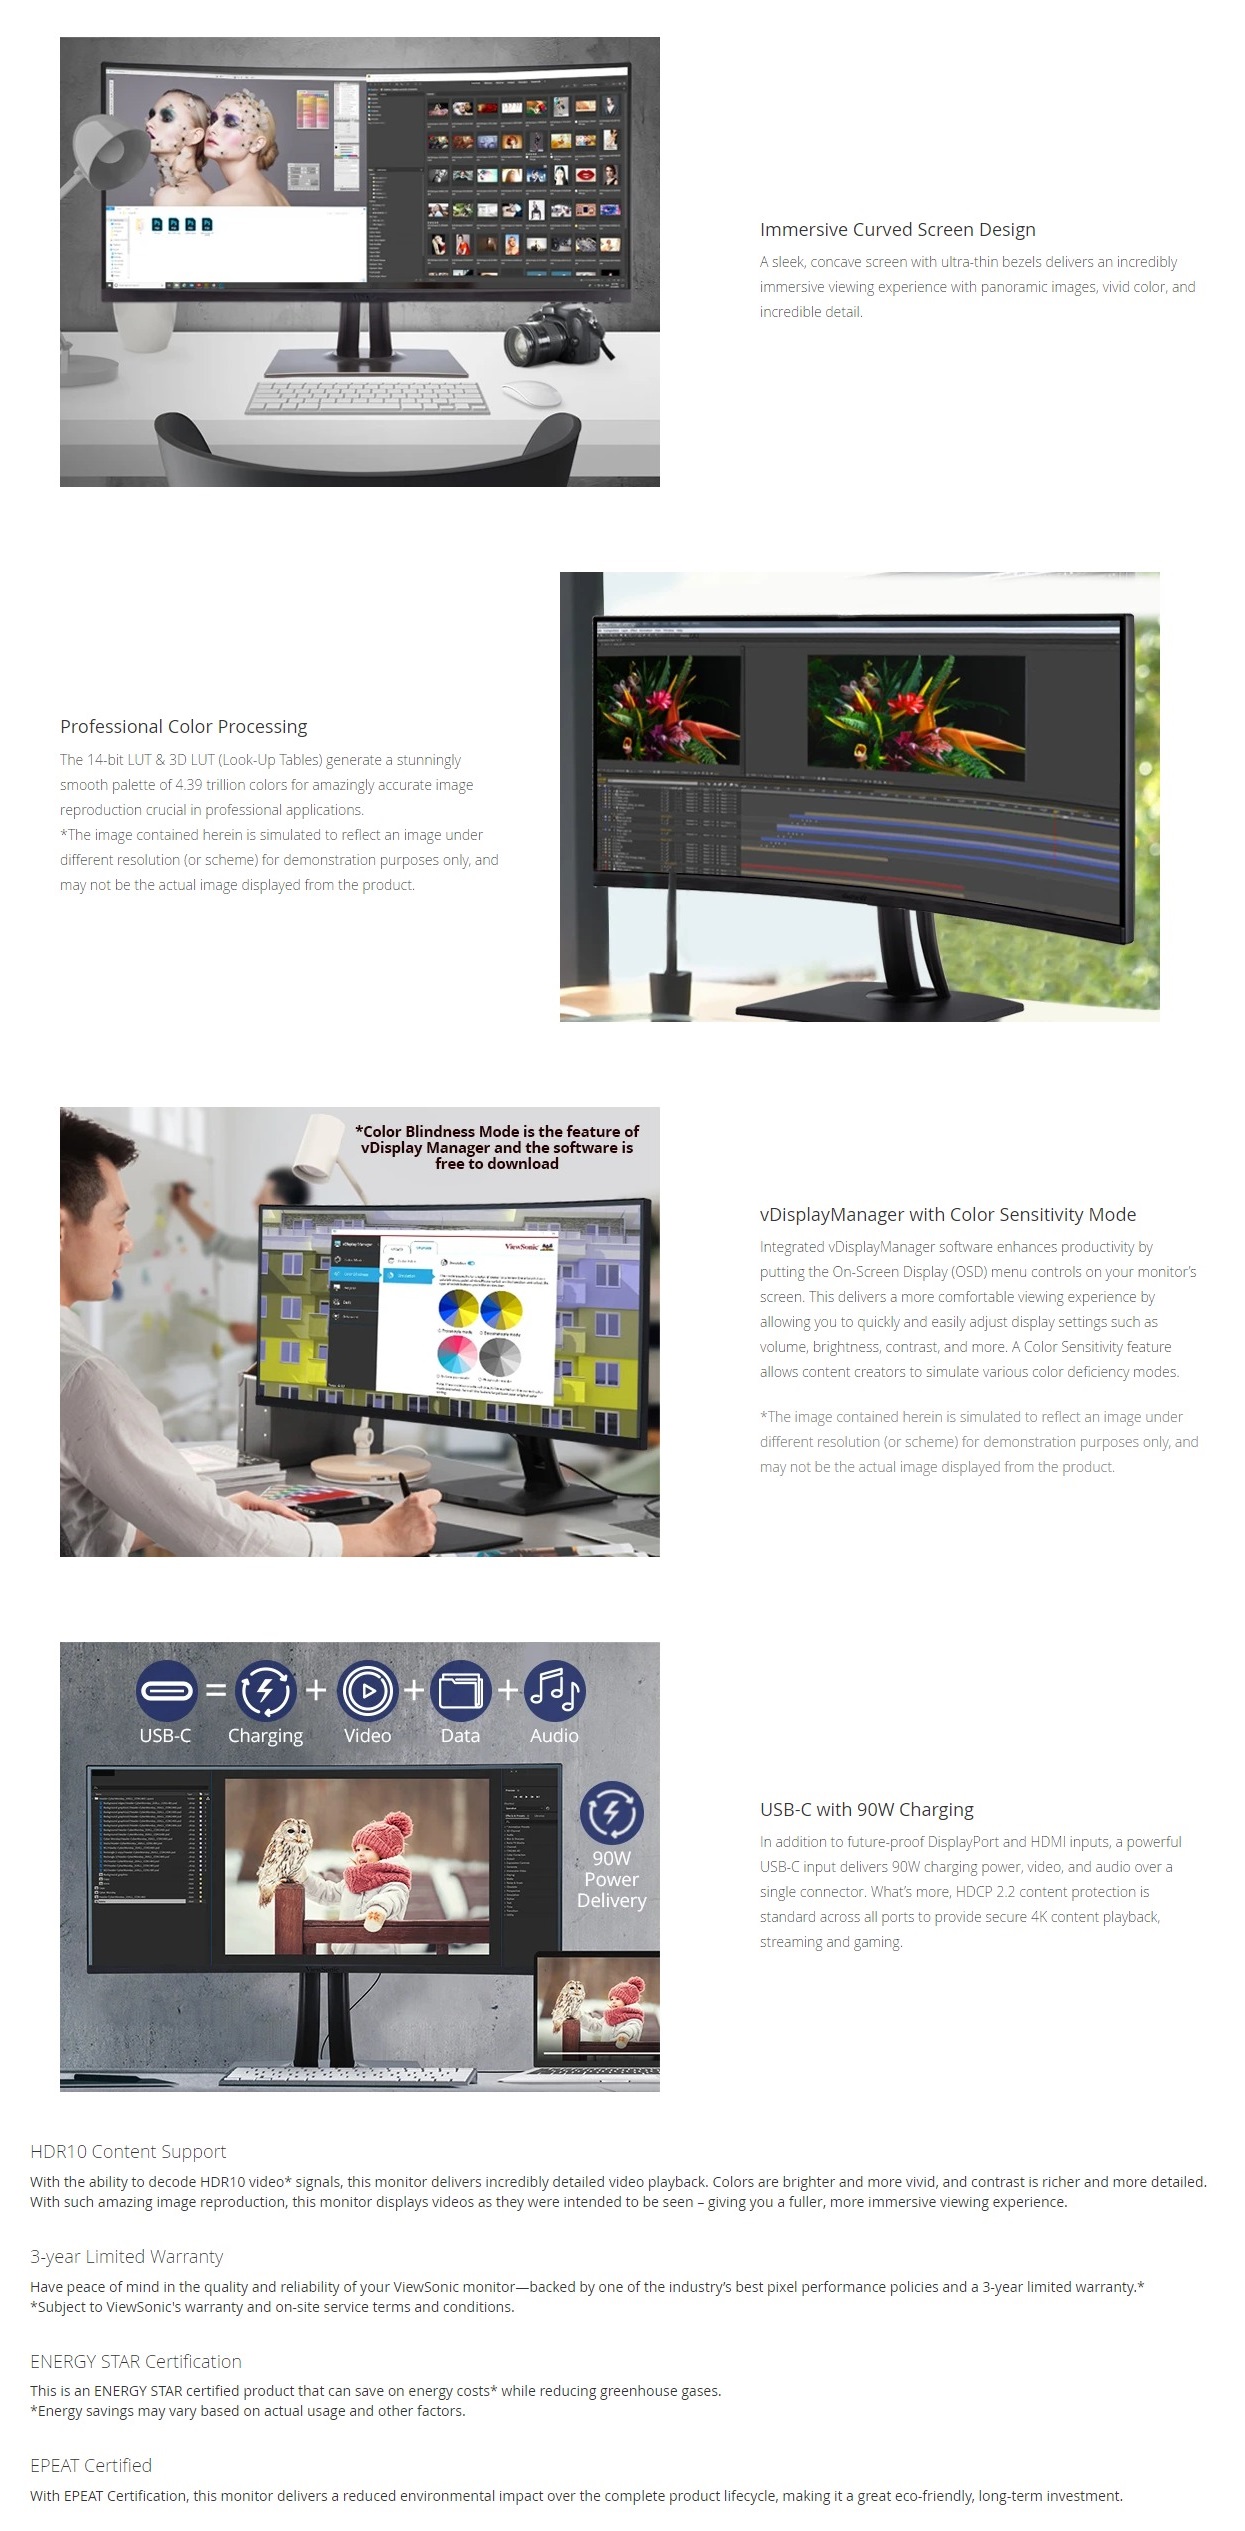 A large marketing image providing additional information about the product Viewsonic ColorPro VP3481A 34" Curved UWQHD Ultrawide 100Hz IPS Monitor - Additional alt info not provided